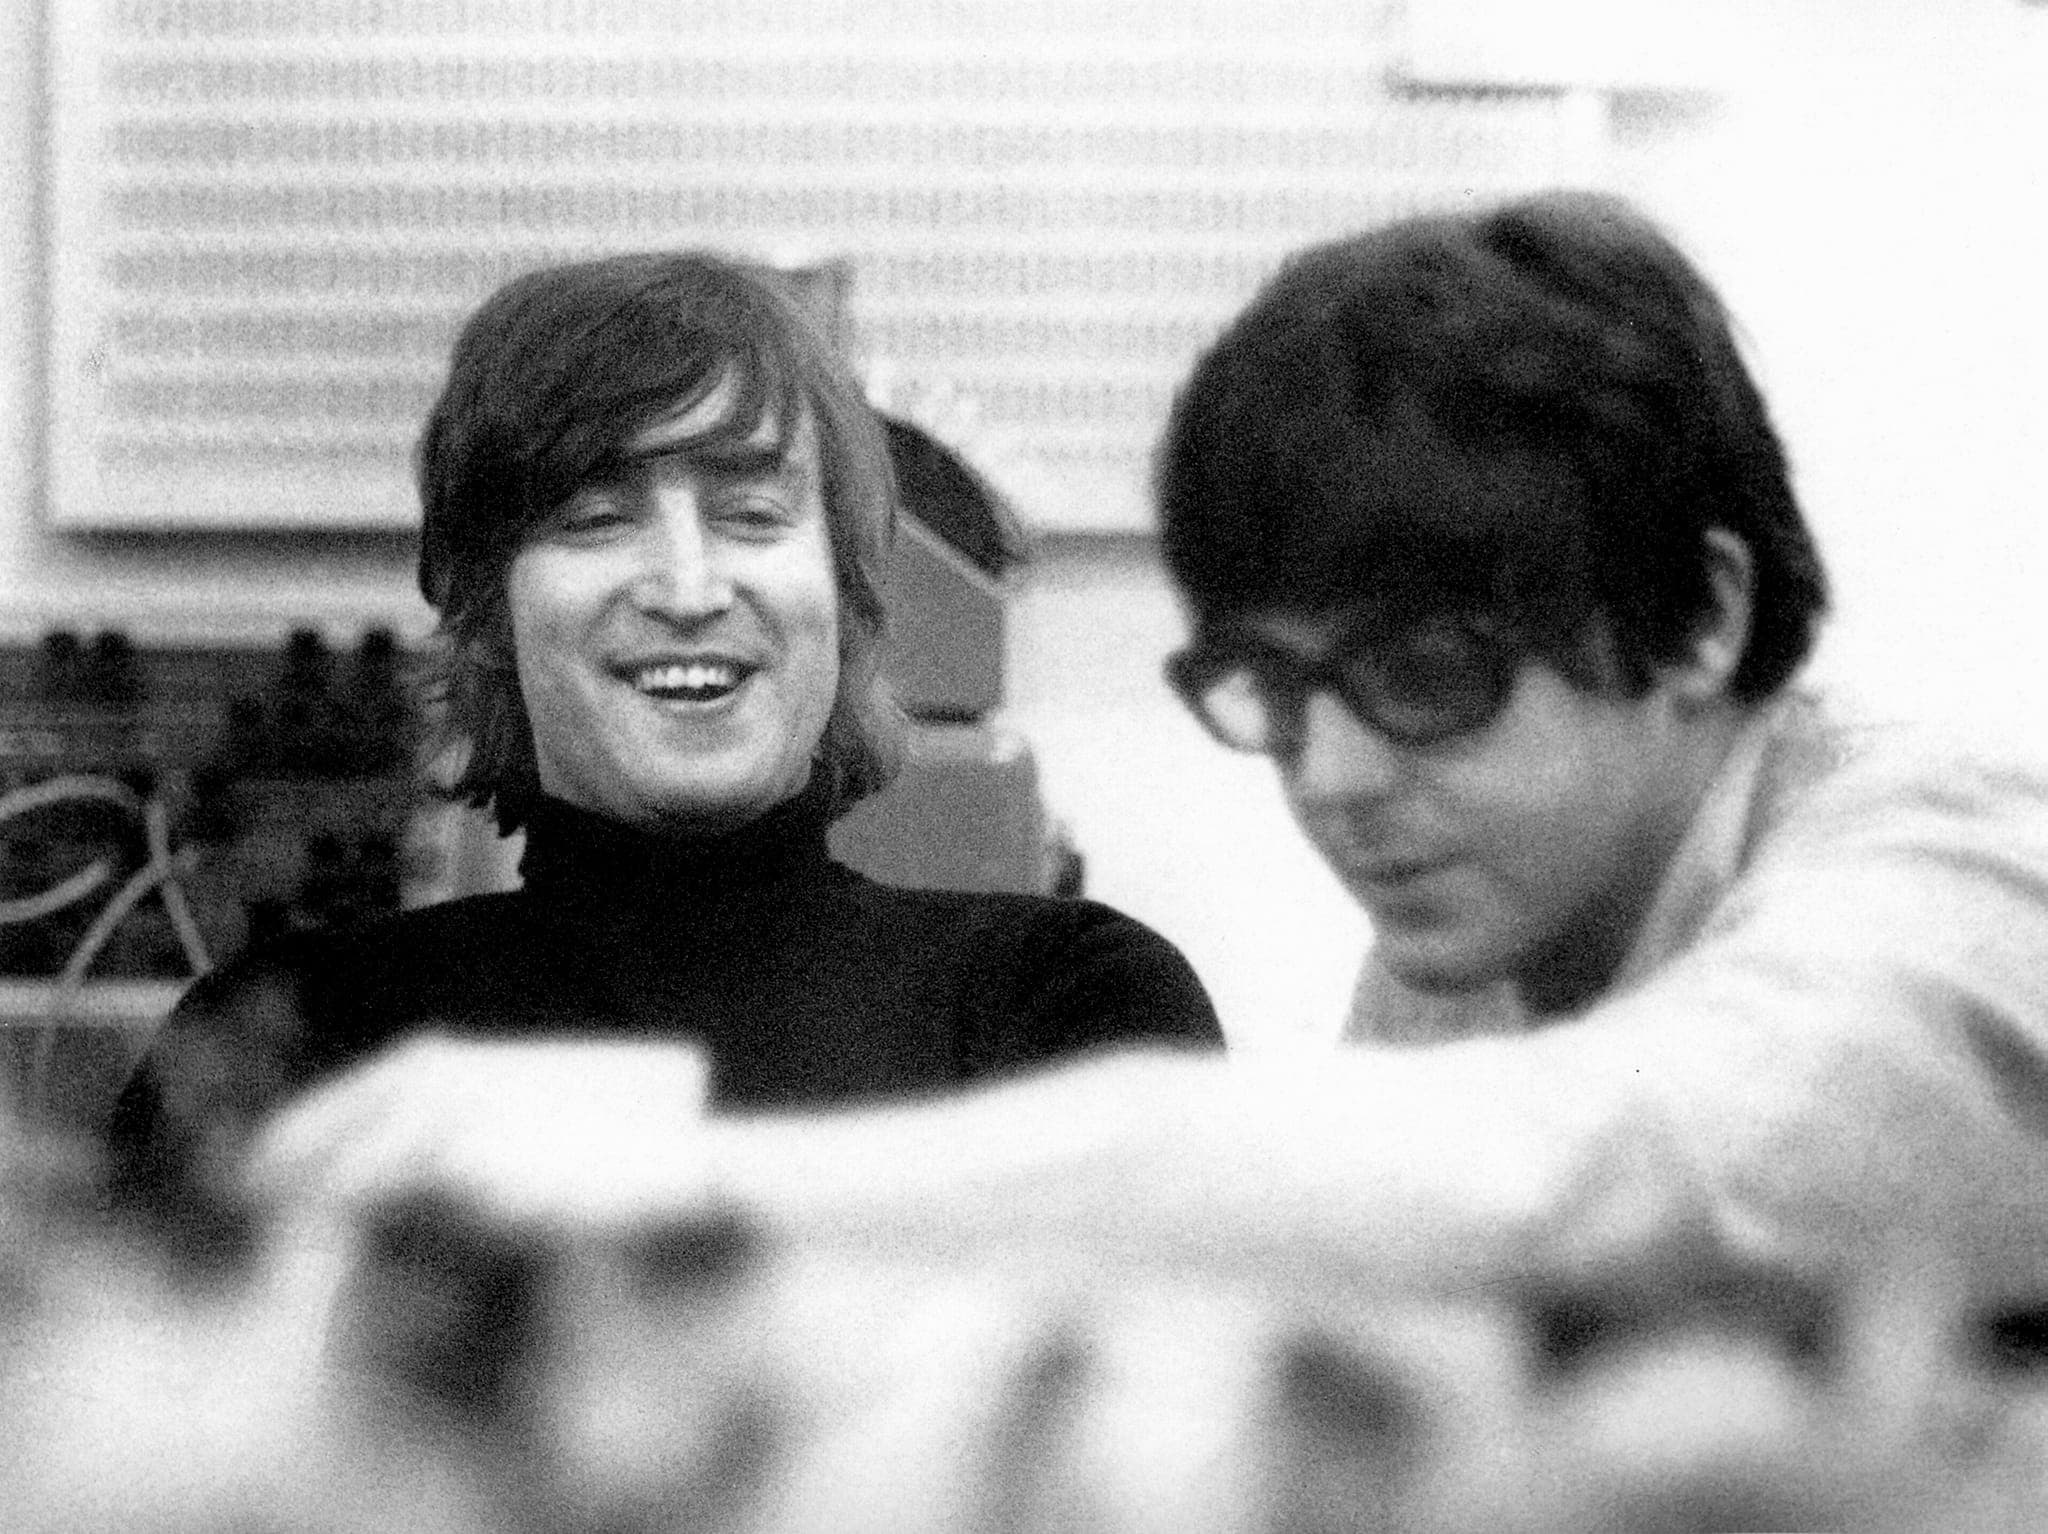 In The Life OfThe Beatles: Here, There and Everywhere Lyrics